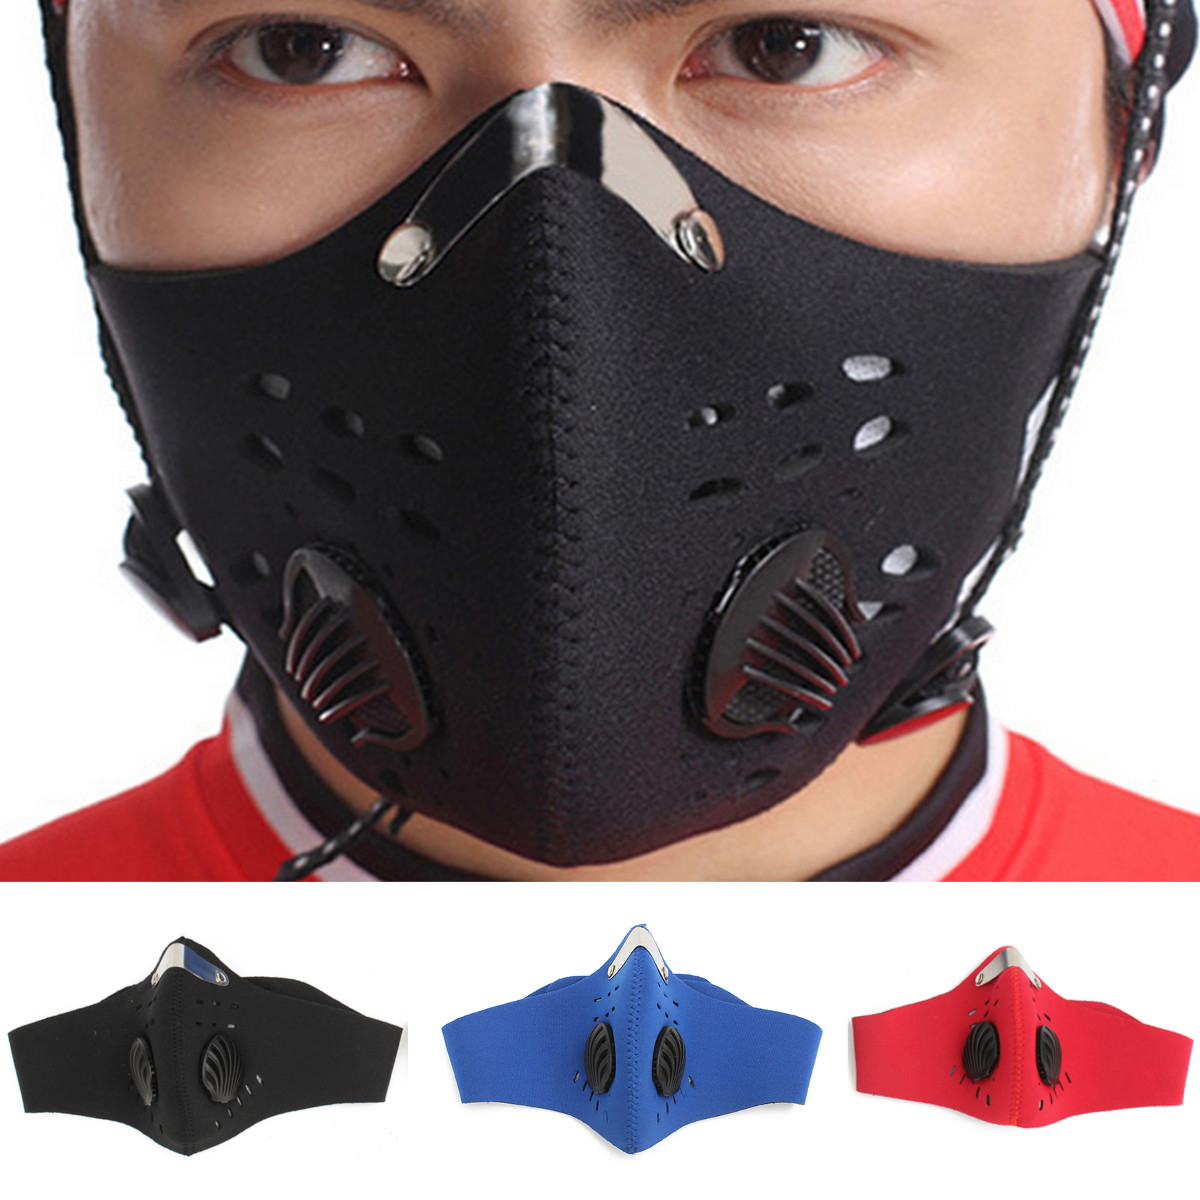 Motorcycle Racing PM2.5 Gas Protection Filter Respirator Dust Face Mask Head 9